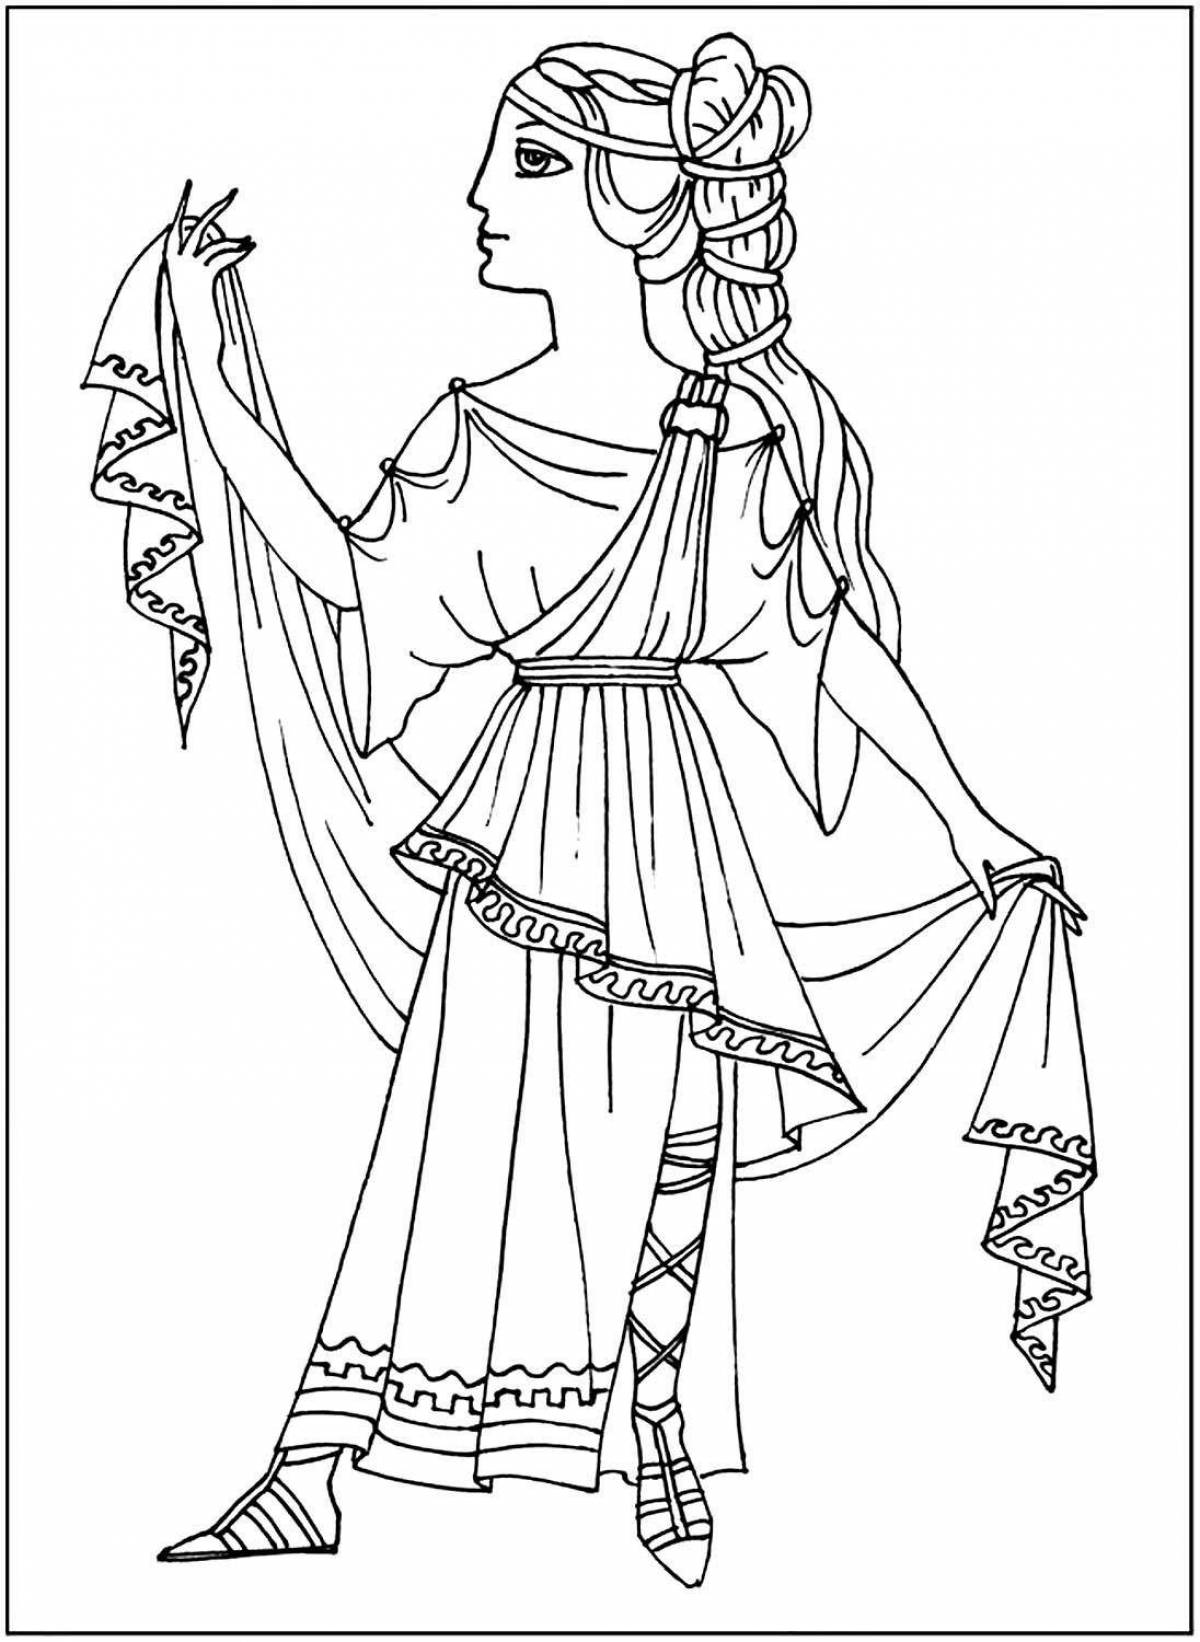 Glorious ancient greece coloring book